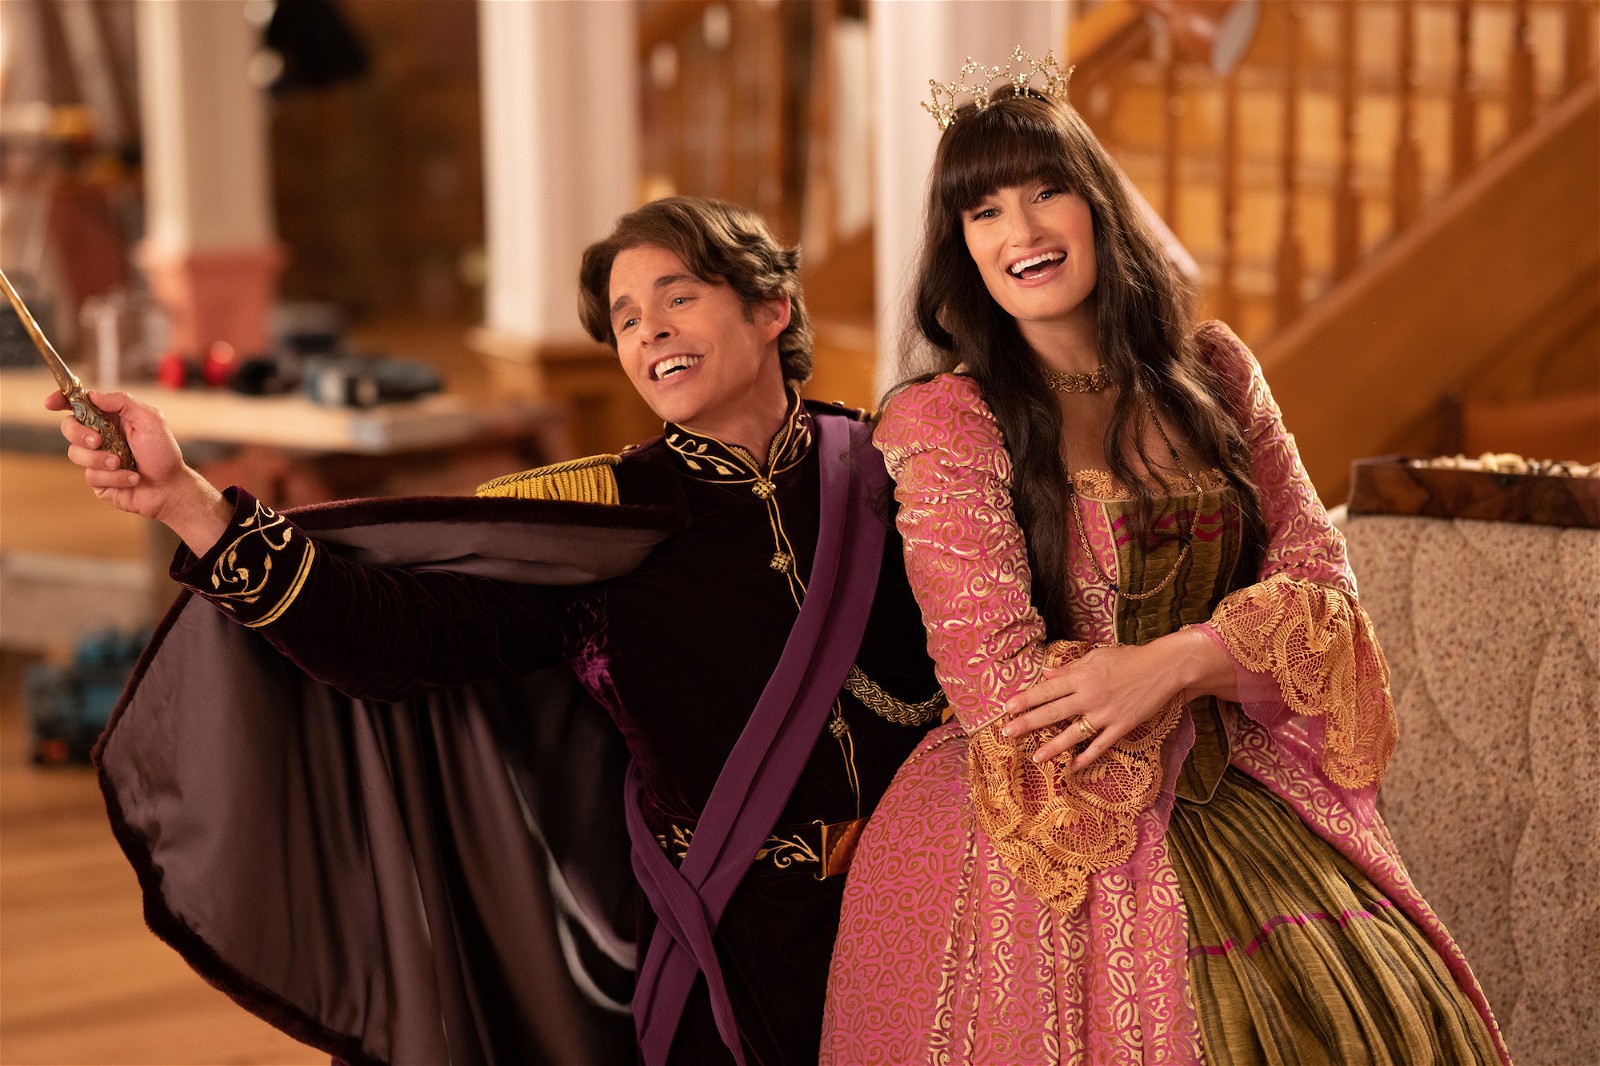 (L-R): James Marsden as Prince Edward and Idina Menzel as Nancy Tremaine in Disney's live-action DISENCHANTED, exclusively on Disney+. Photo by Jonathan Hession. © 2022 Disney Enterprises, Inc. All Rights Reserved.